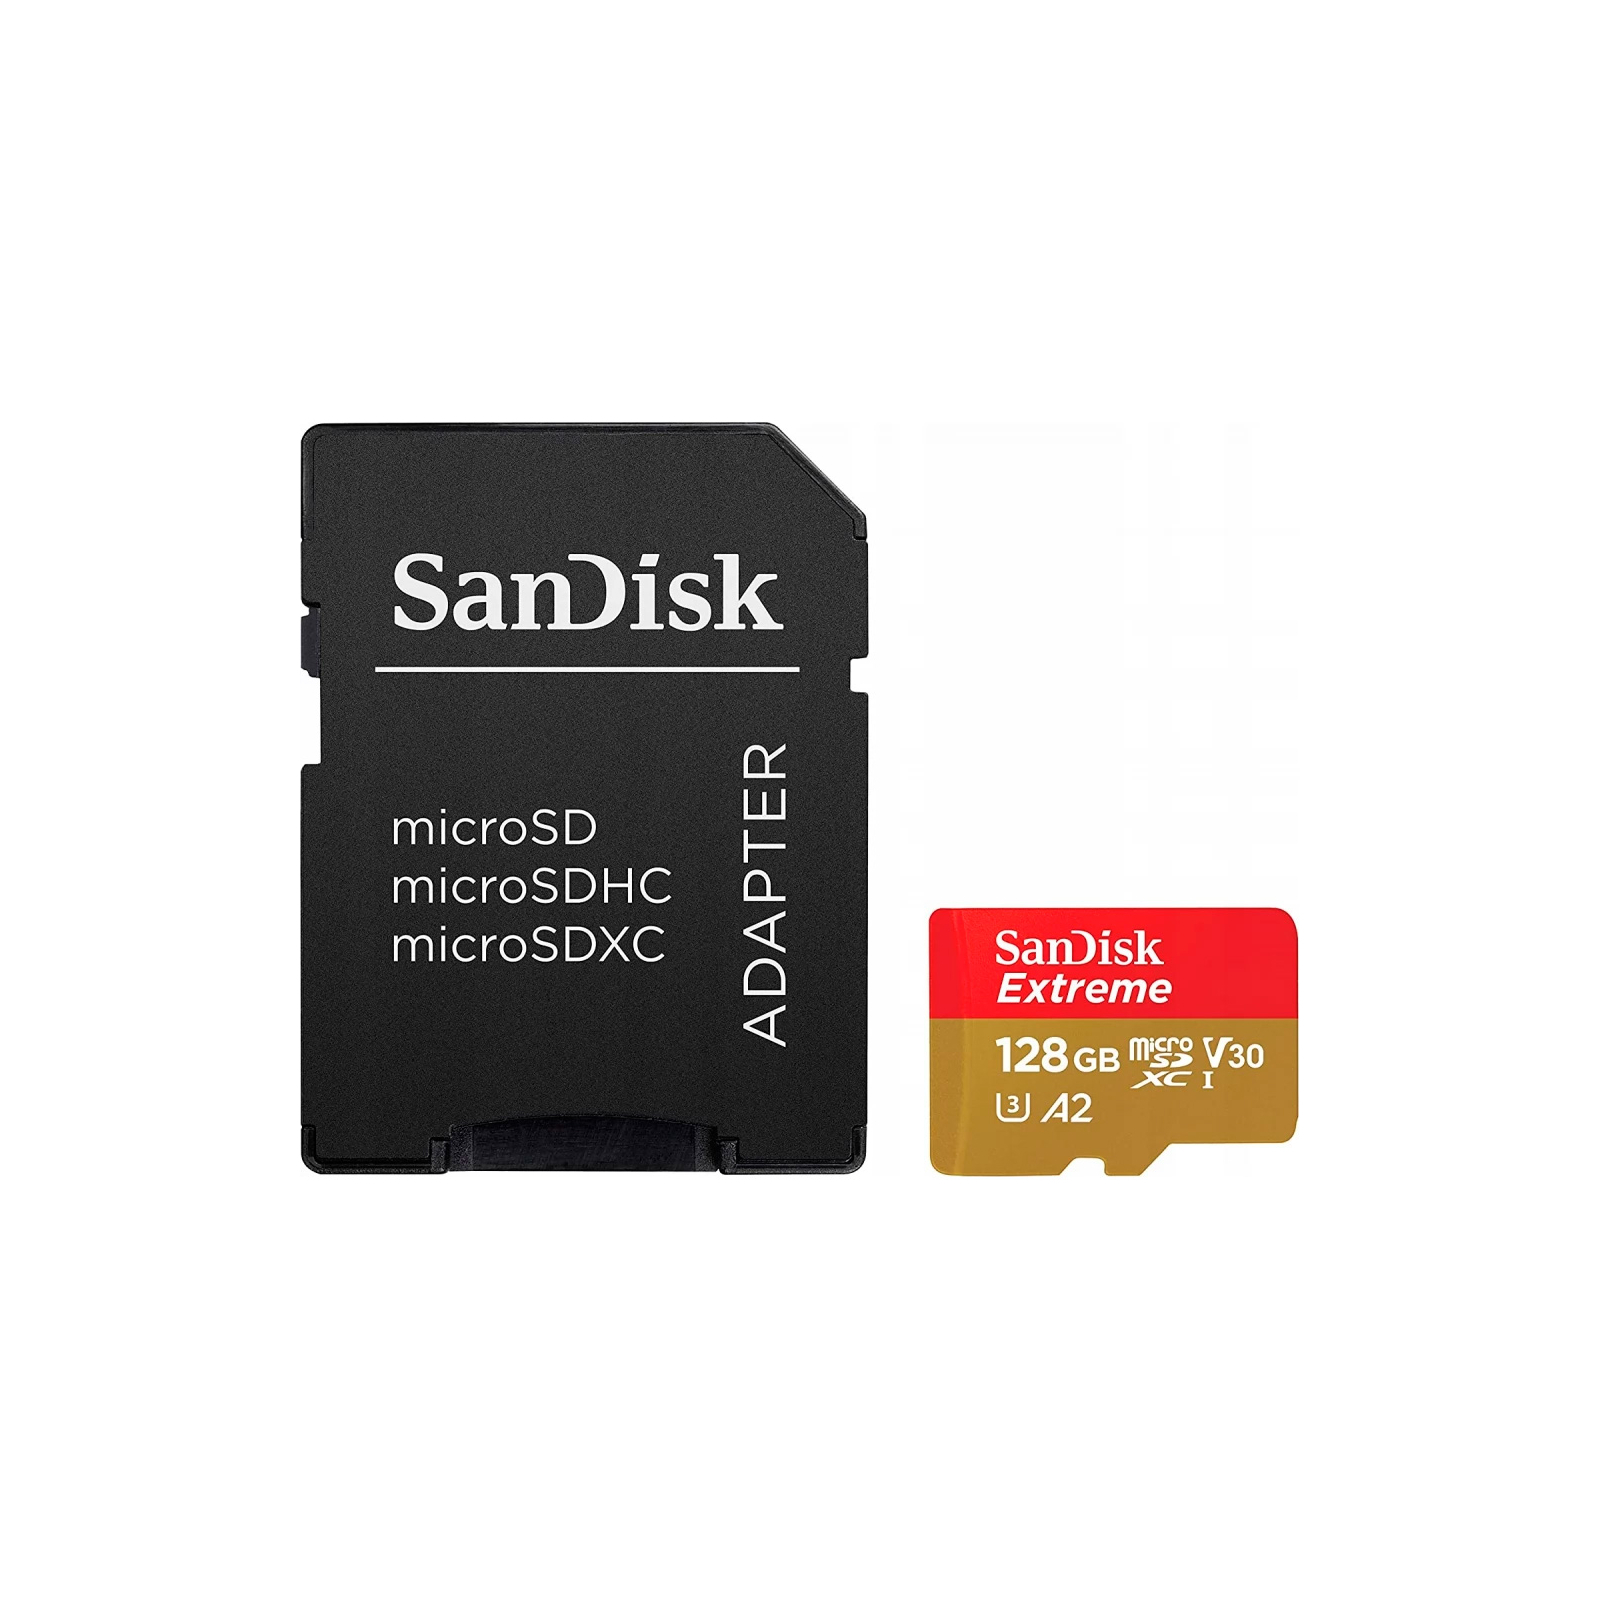 Карта памяти SanDisk 128GB microSD class 10 UHS-I Extreme For Action Cams and Dro (SDSQXAA-128G-GN6AA)